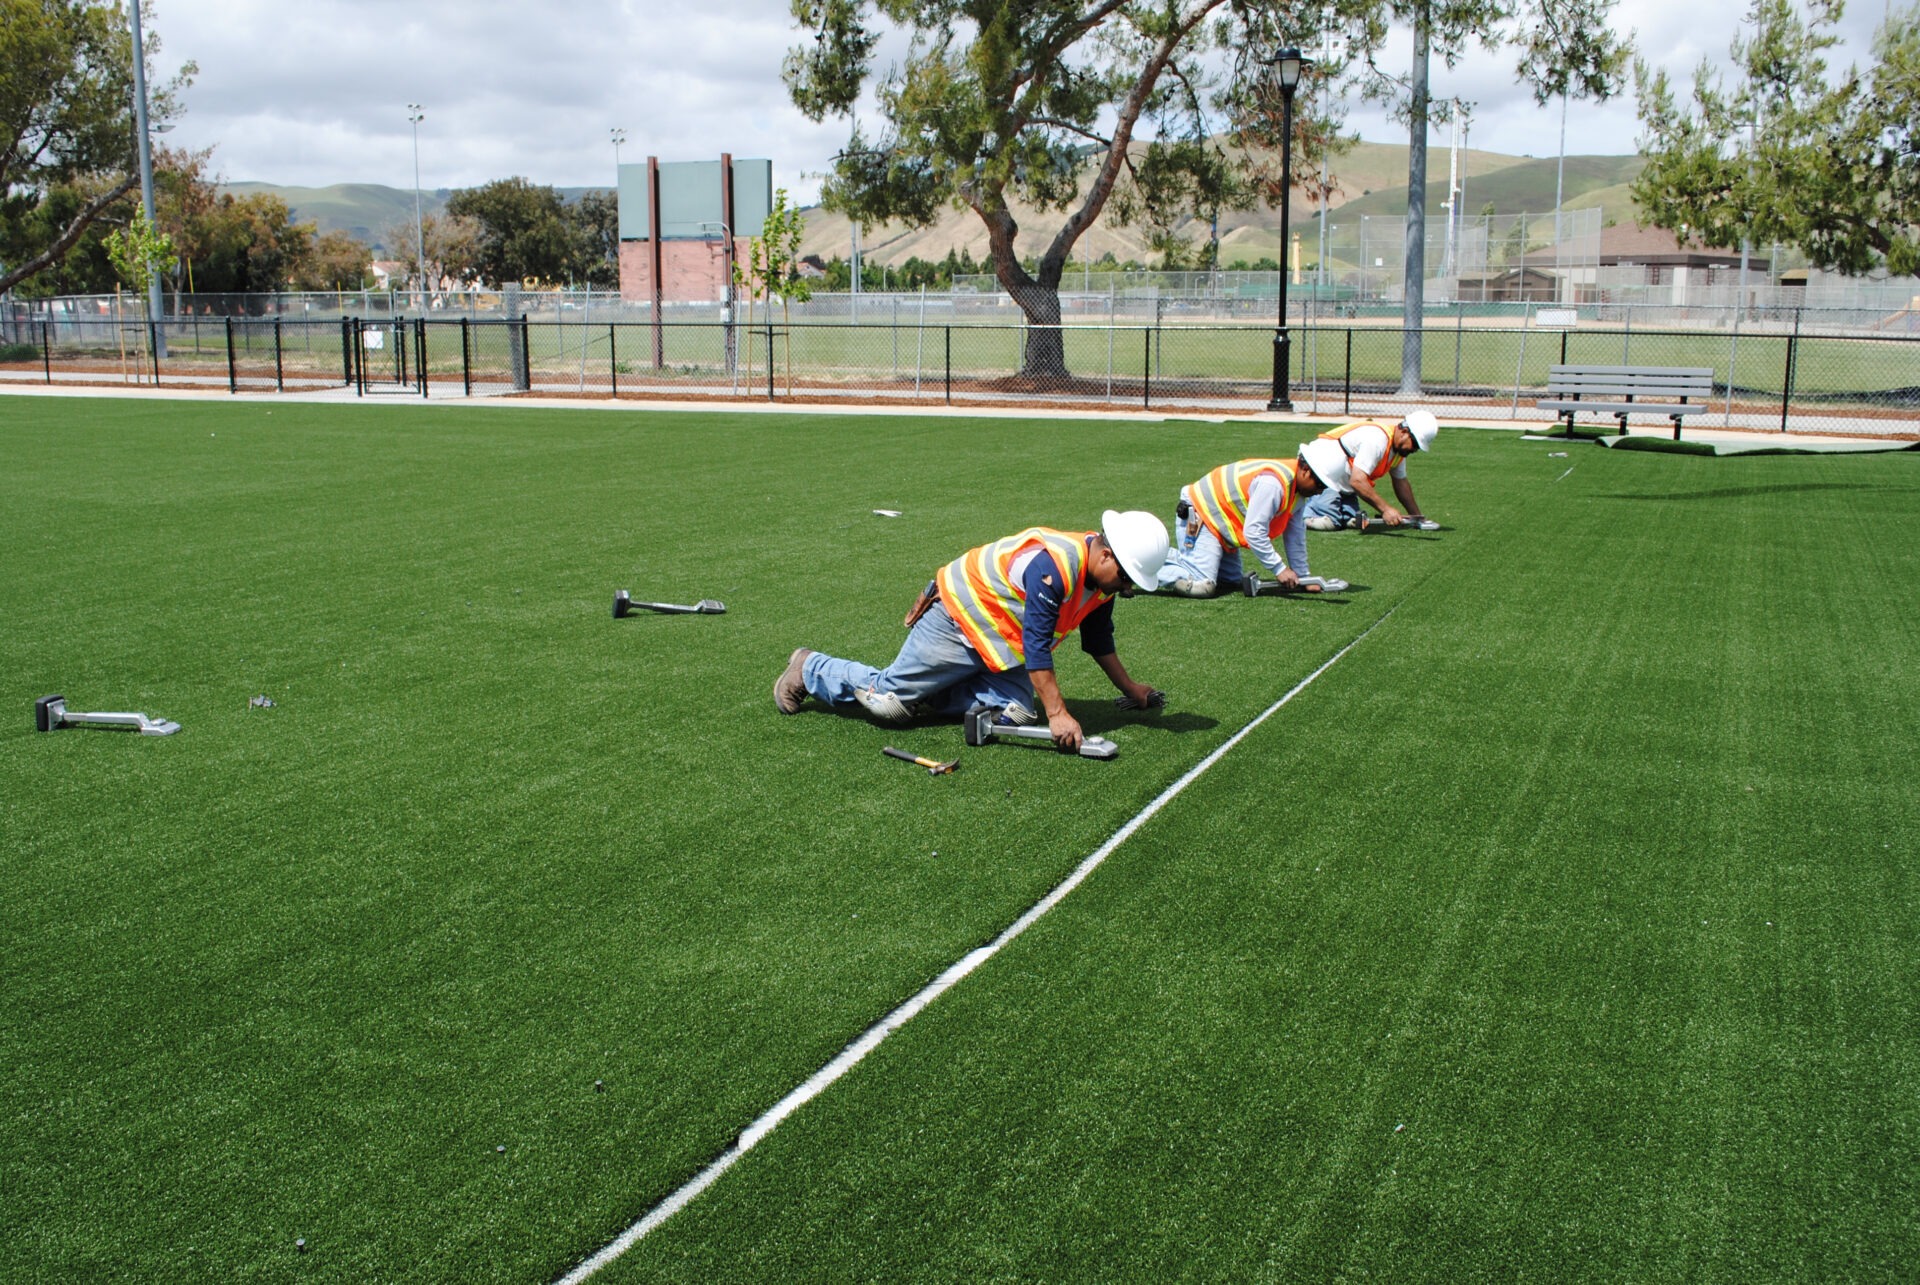 Three people in reflective vests and helmets are installing artificial turf on a sports field, with tools and a fence visible in the background.